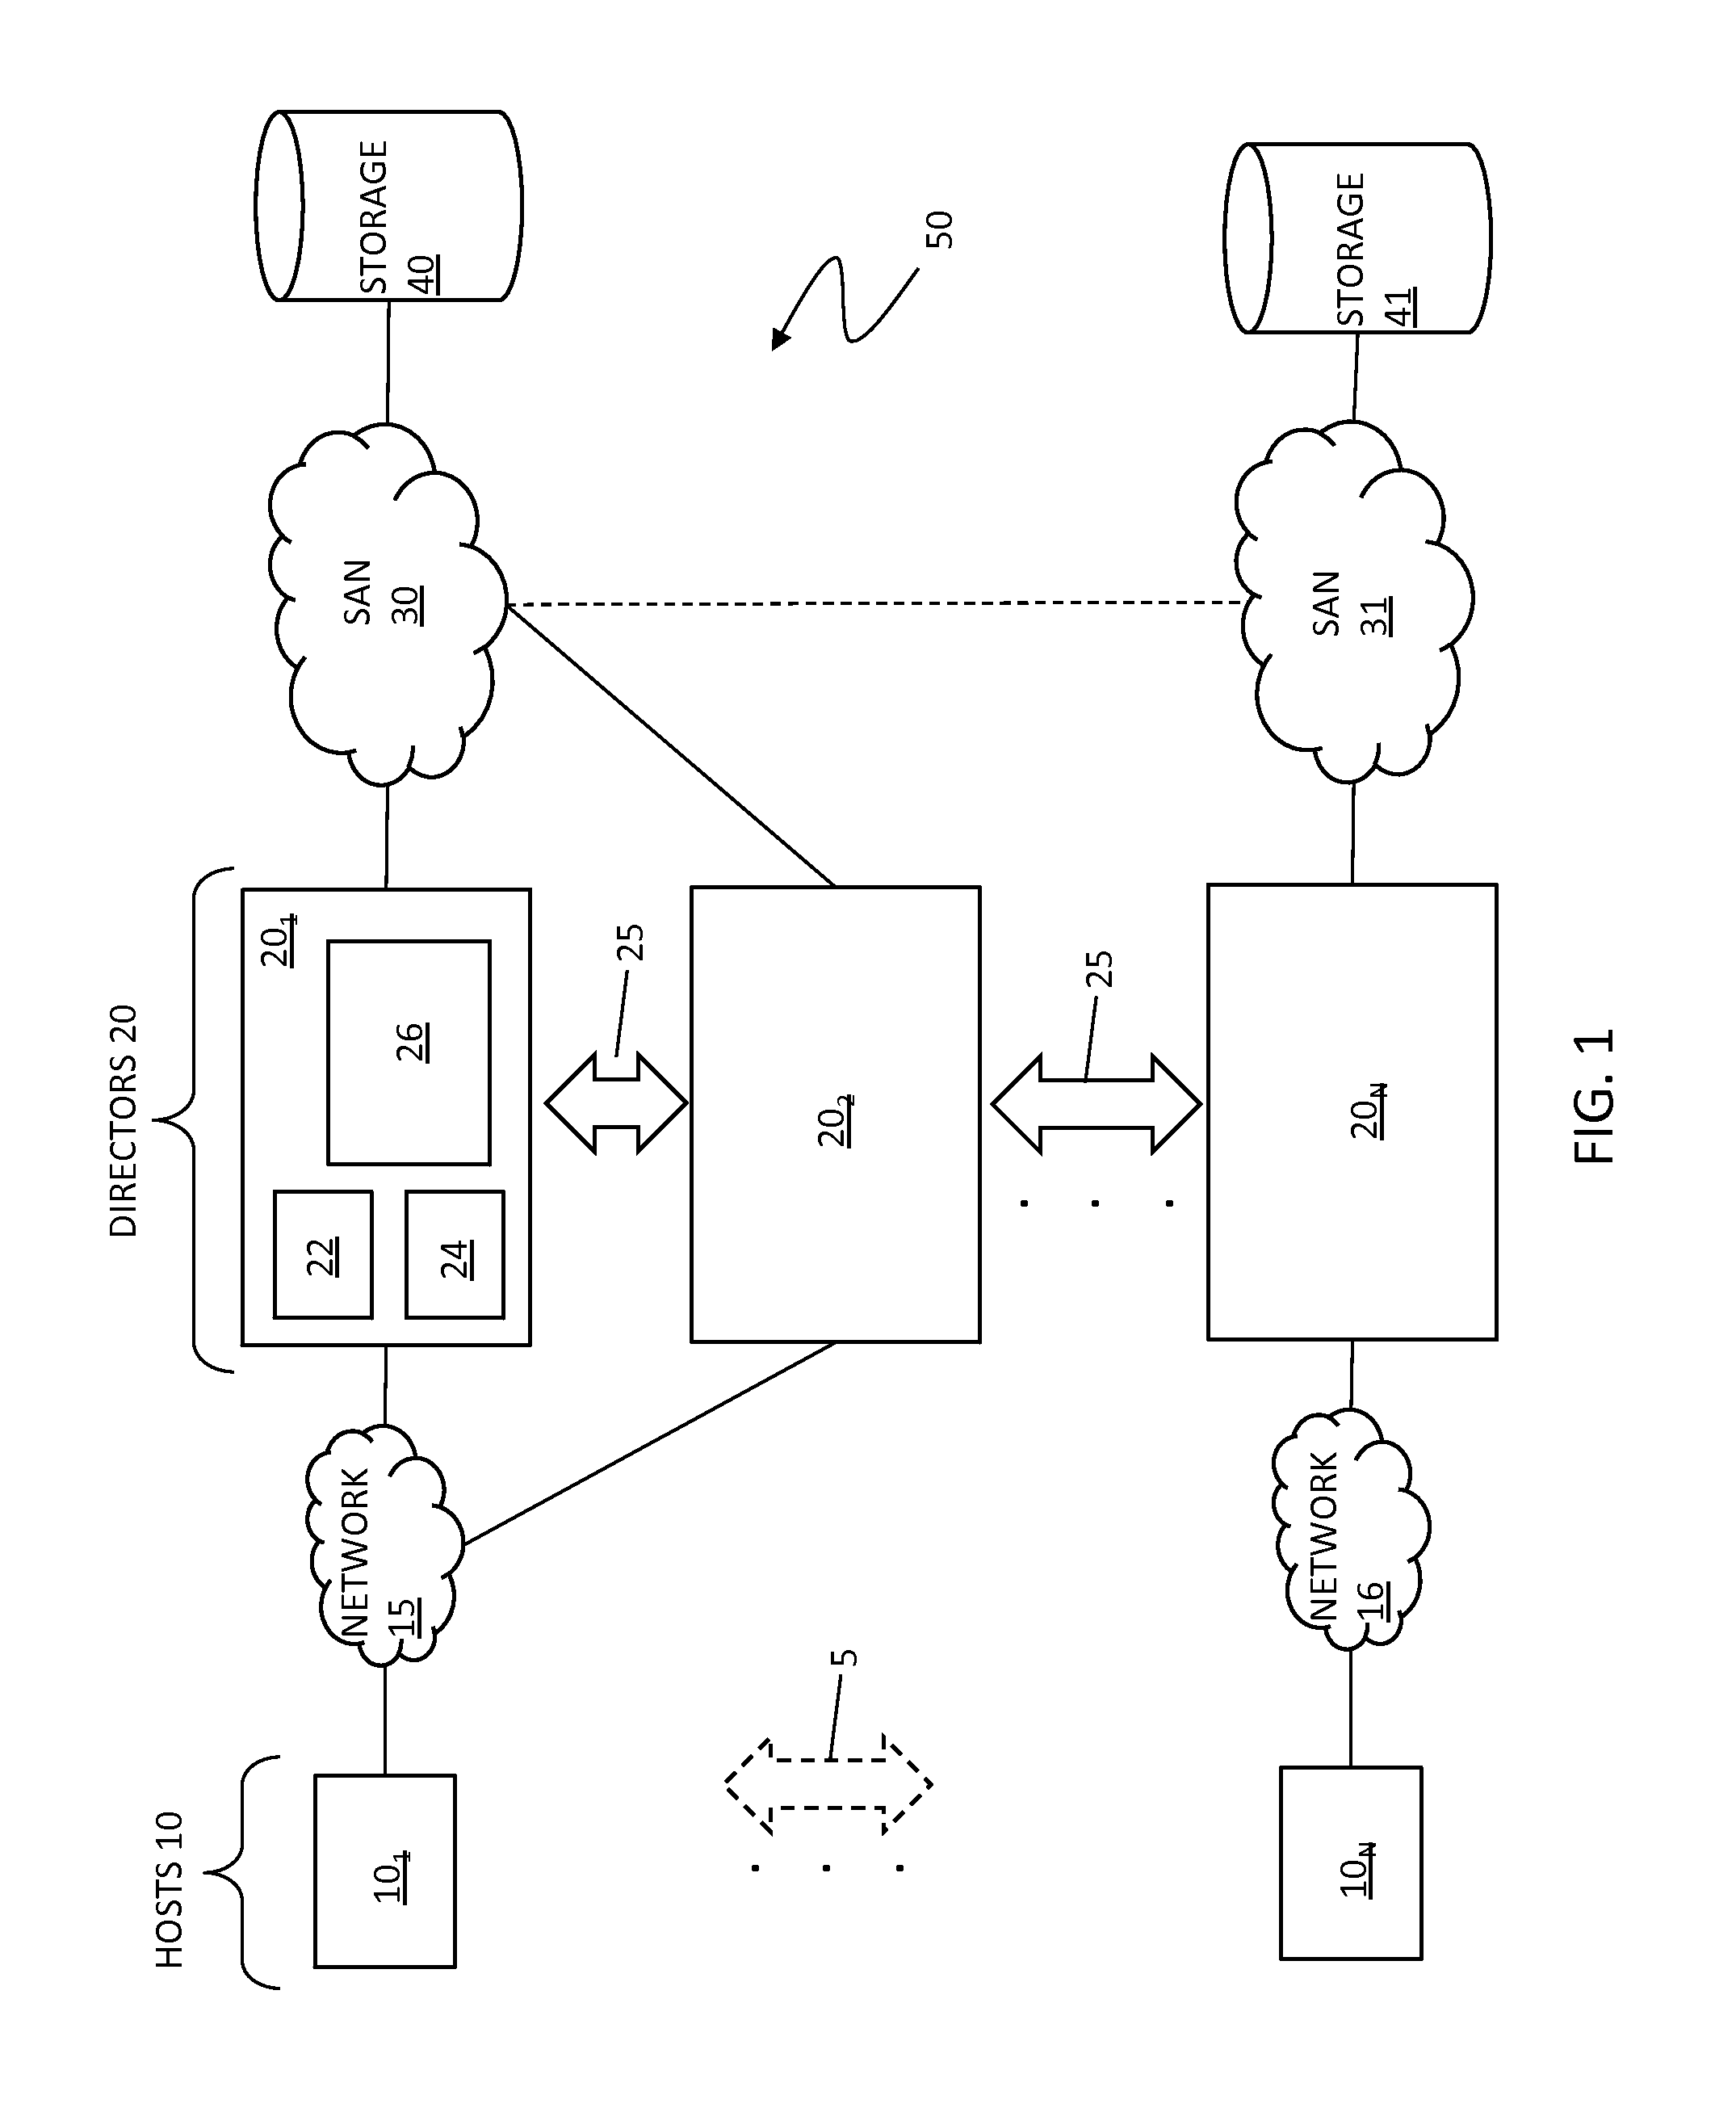 Distributed dynamic federation between multi-connected virtual platform clusters